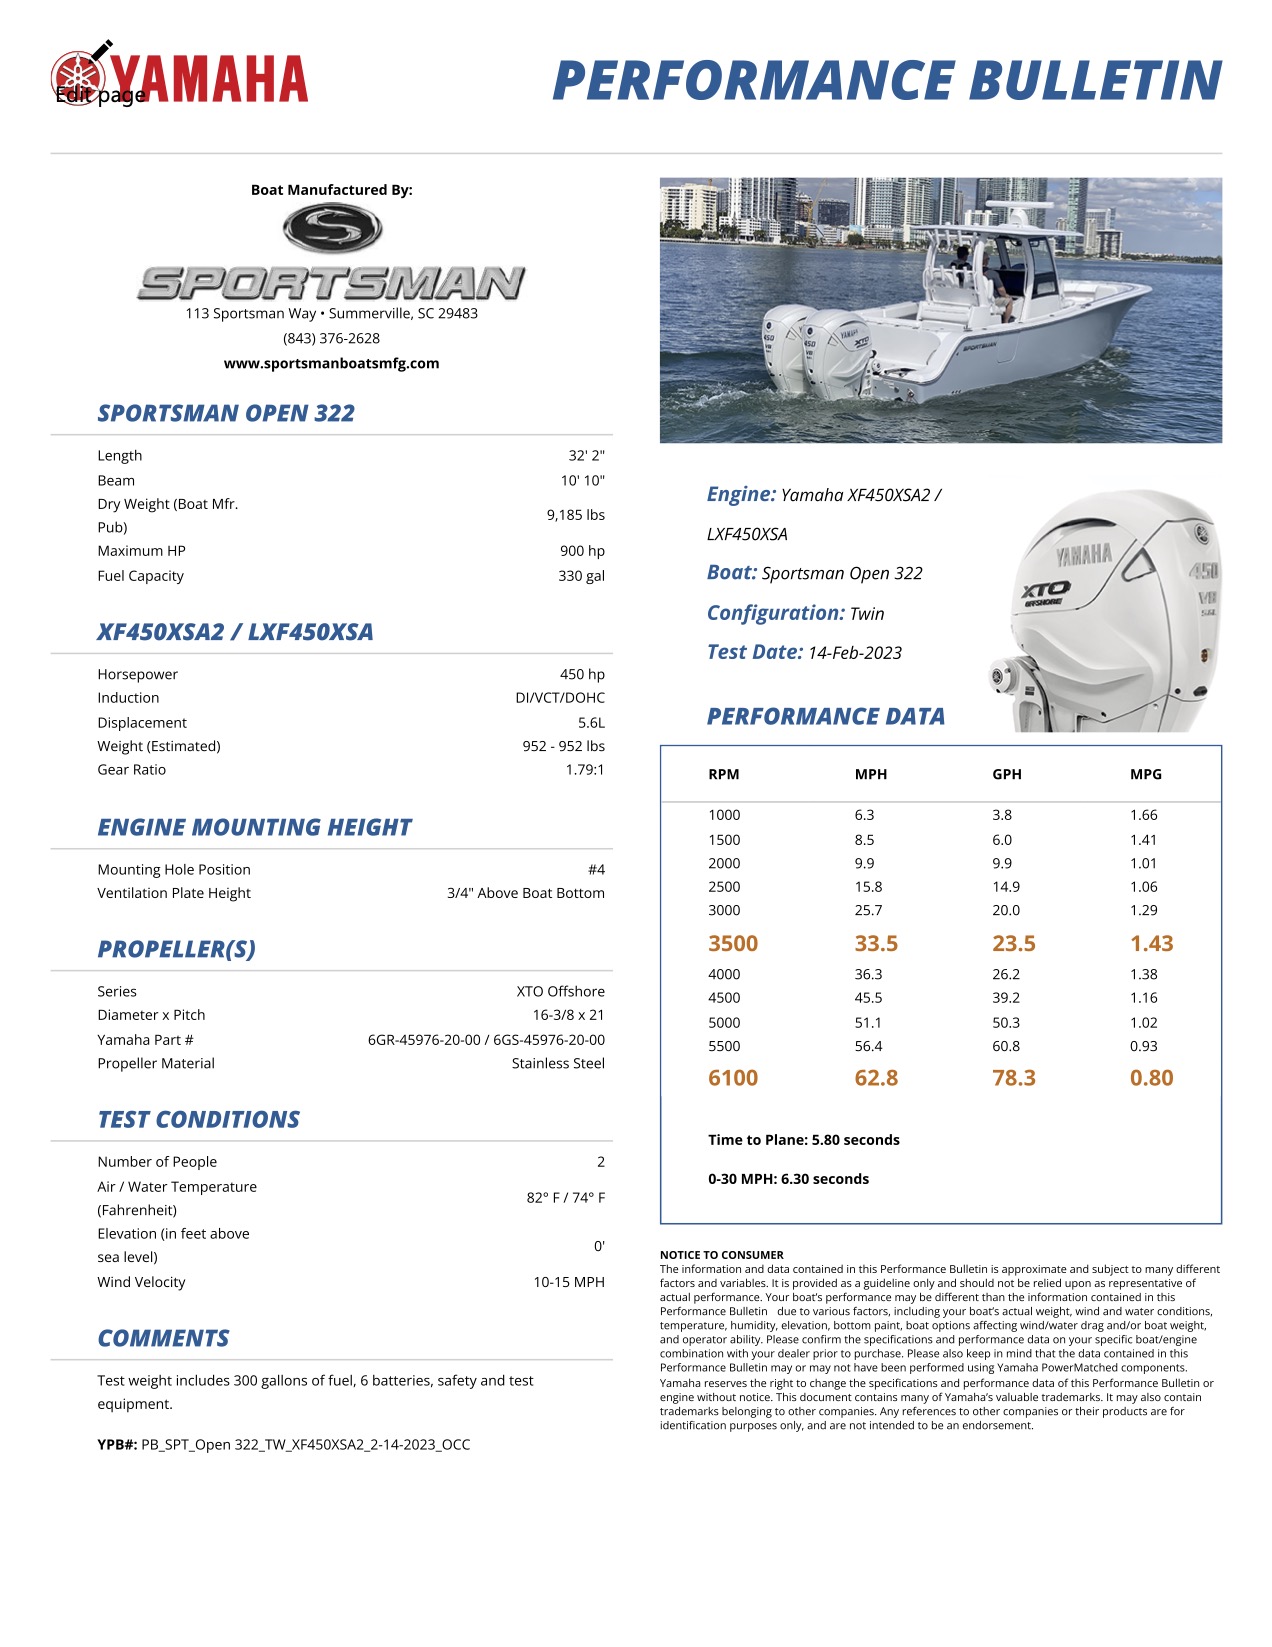 Performance bulletin for 322-center-console